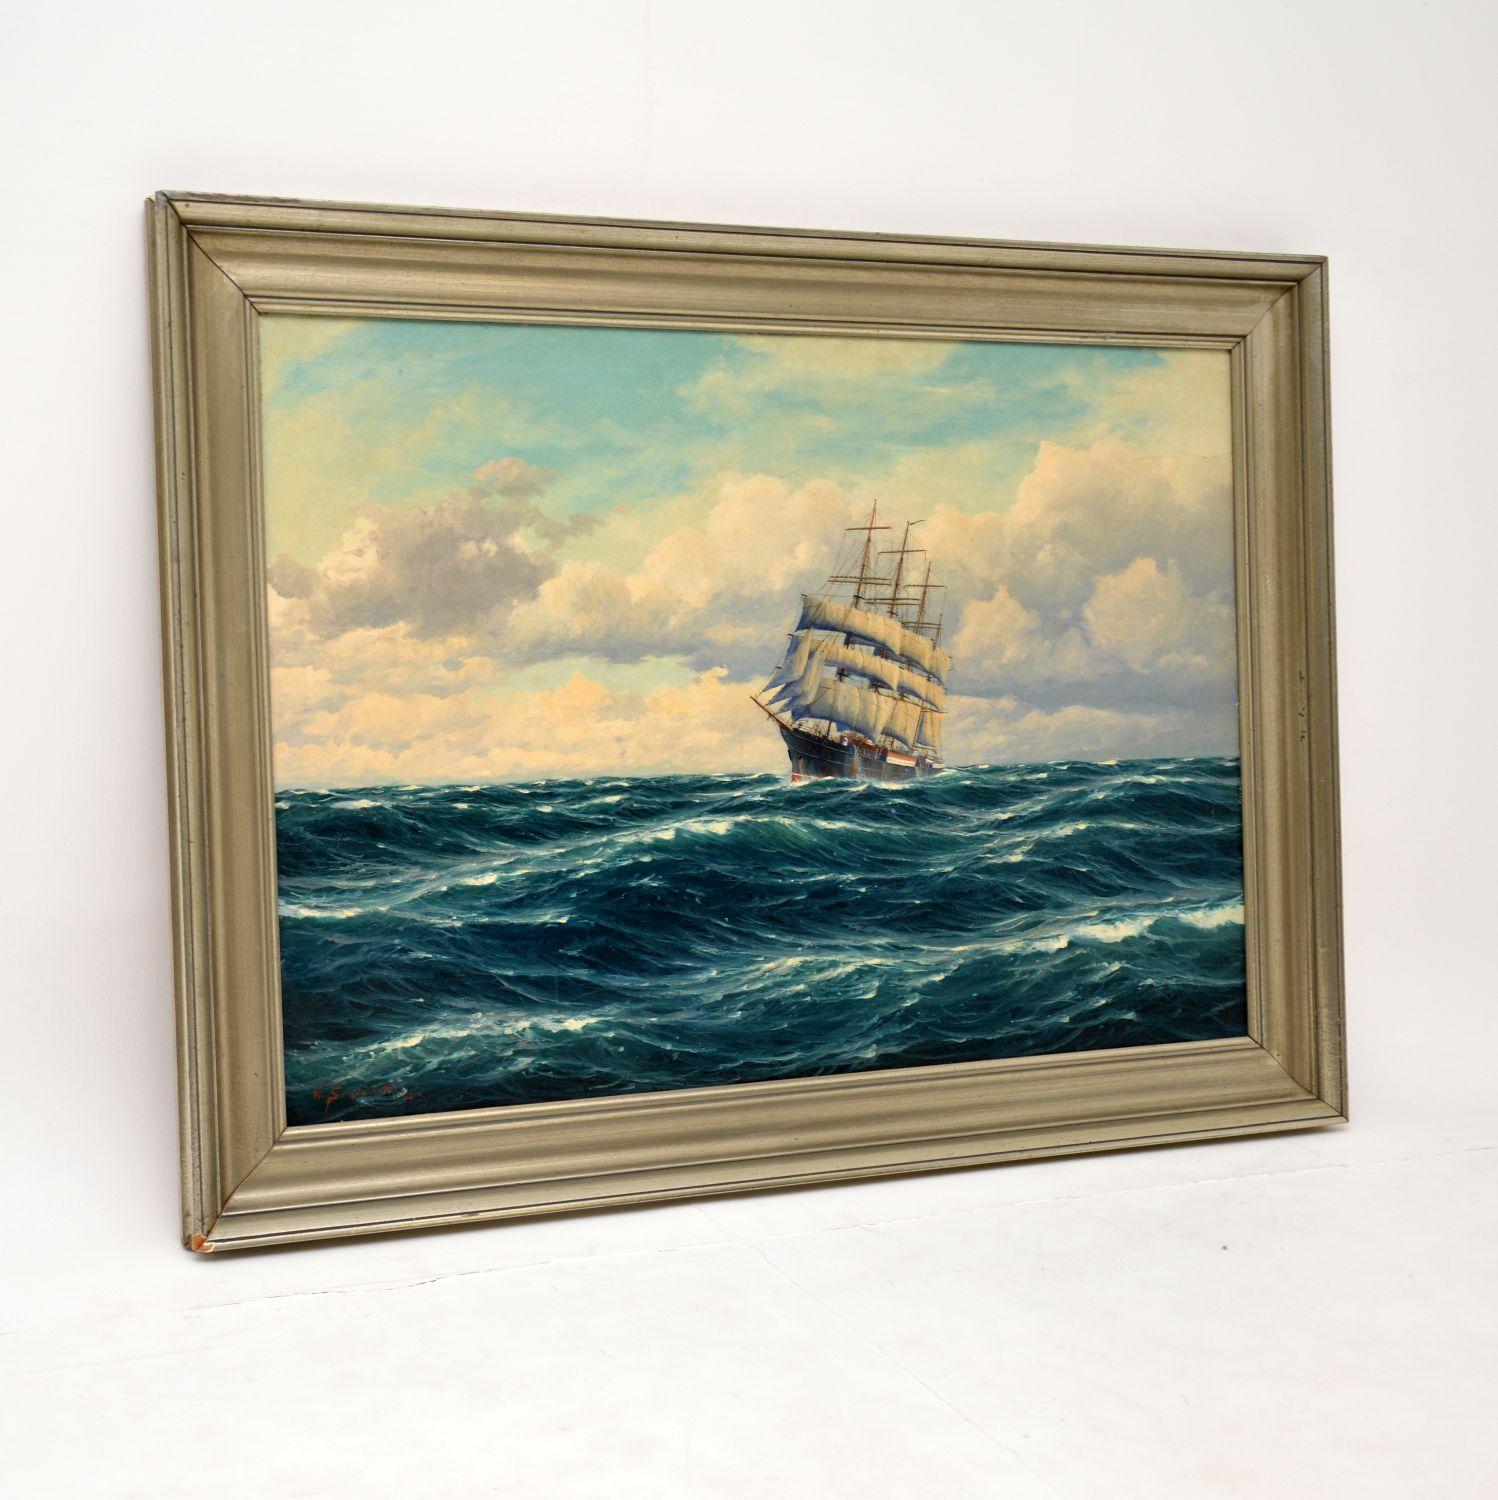 A beautifully executed oil painting dating from circa 1950s-1960s. This depicts a ship out in a stormy sea, it’s a lovely nautical subject.

The painting is signed and is in good overall condition. It looks as if it was re-framed more recently,